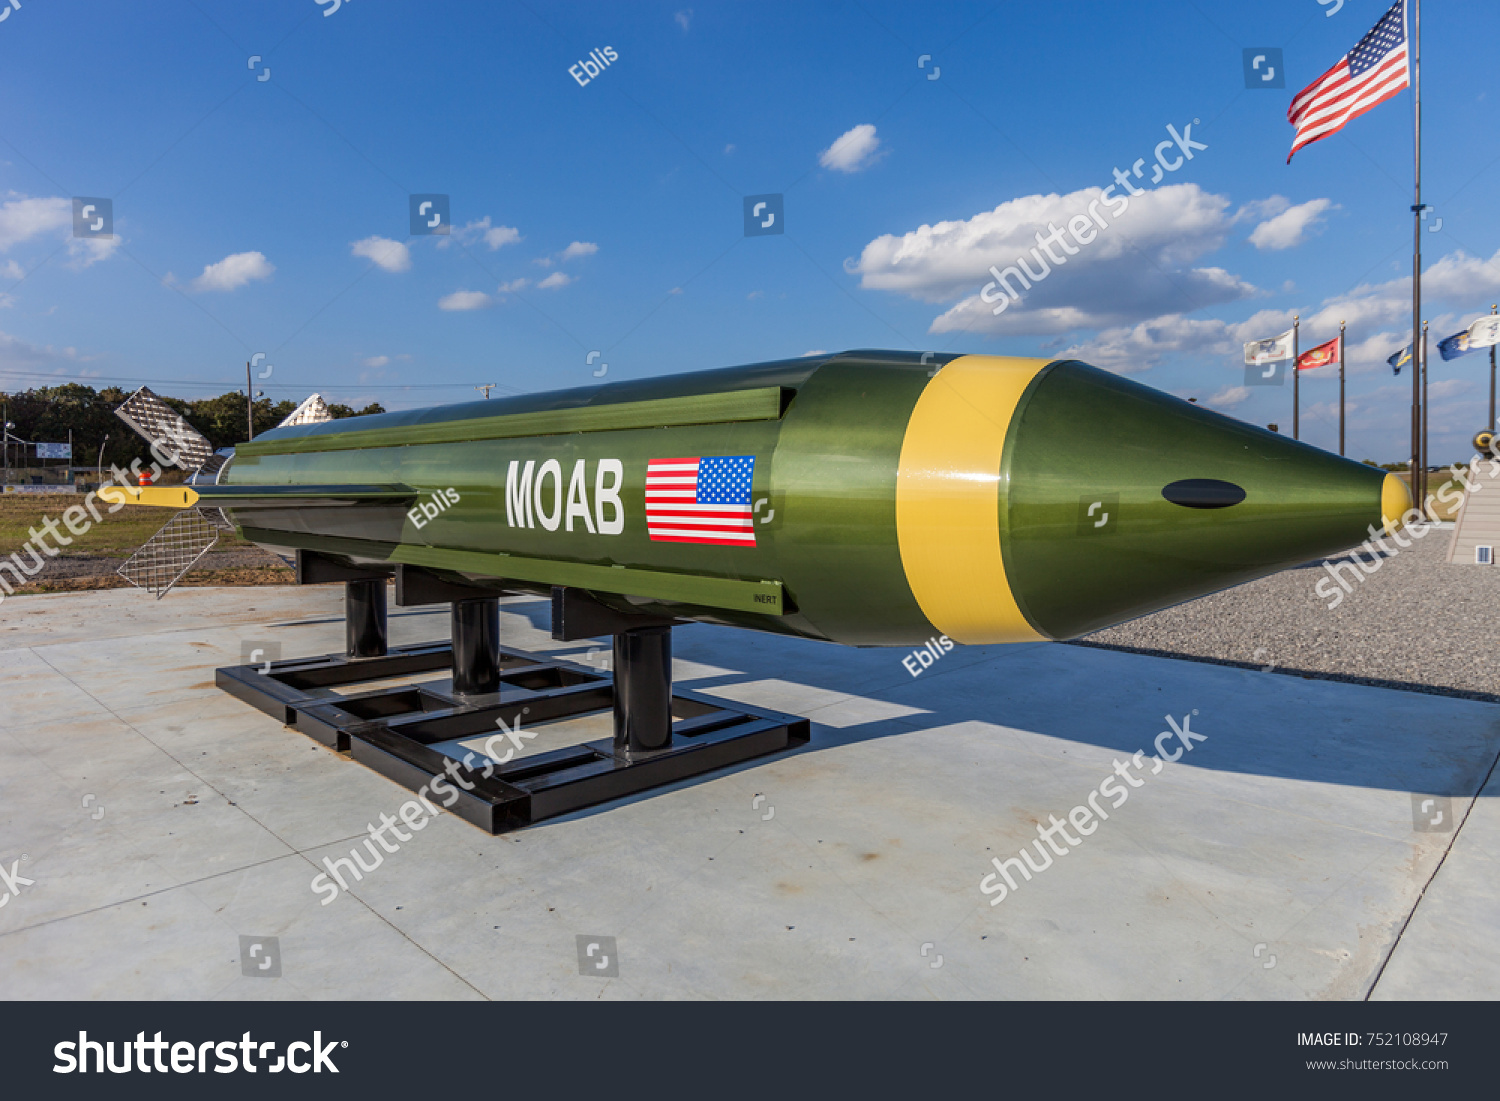 Image result for MOAB, bomb